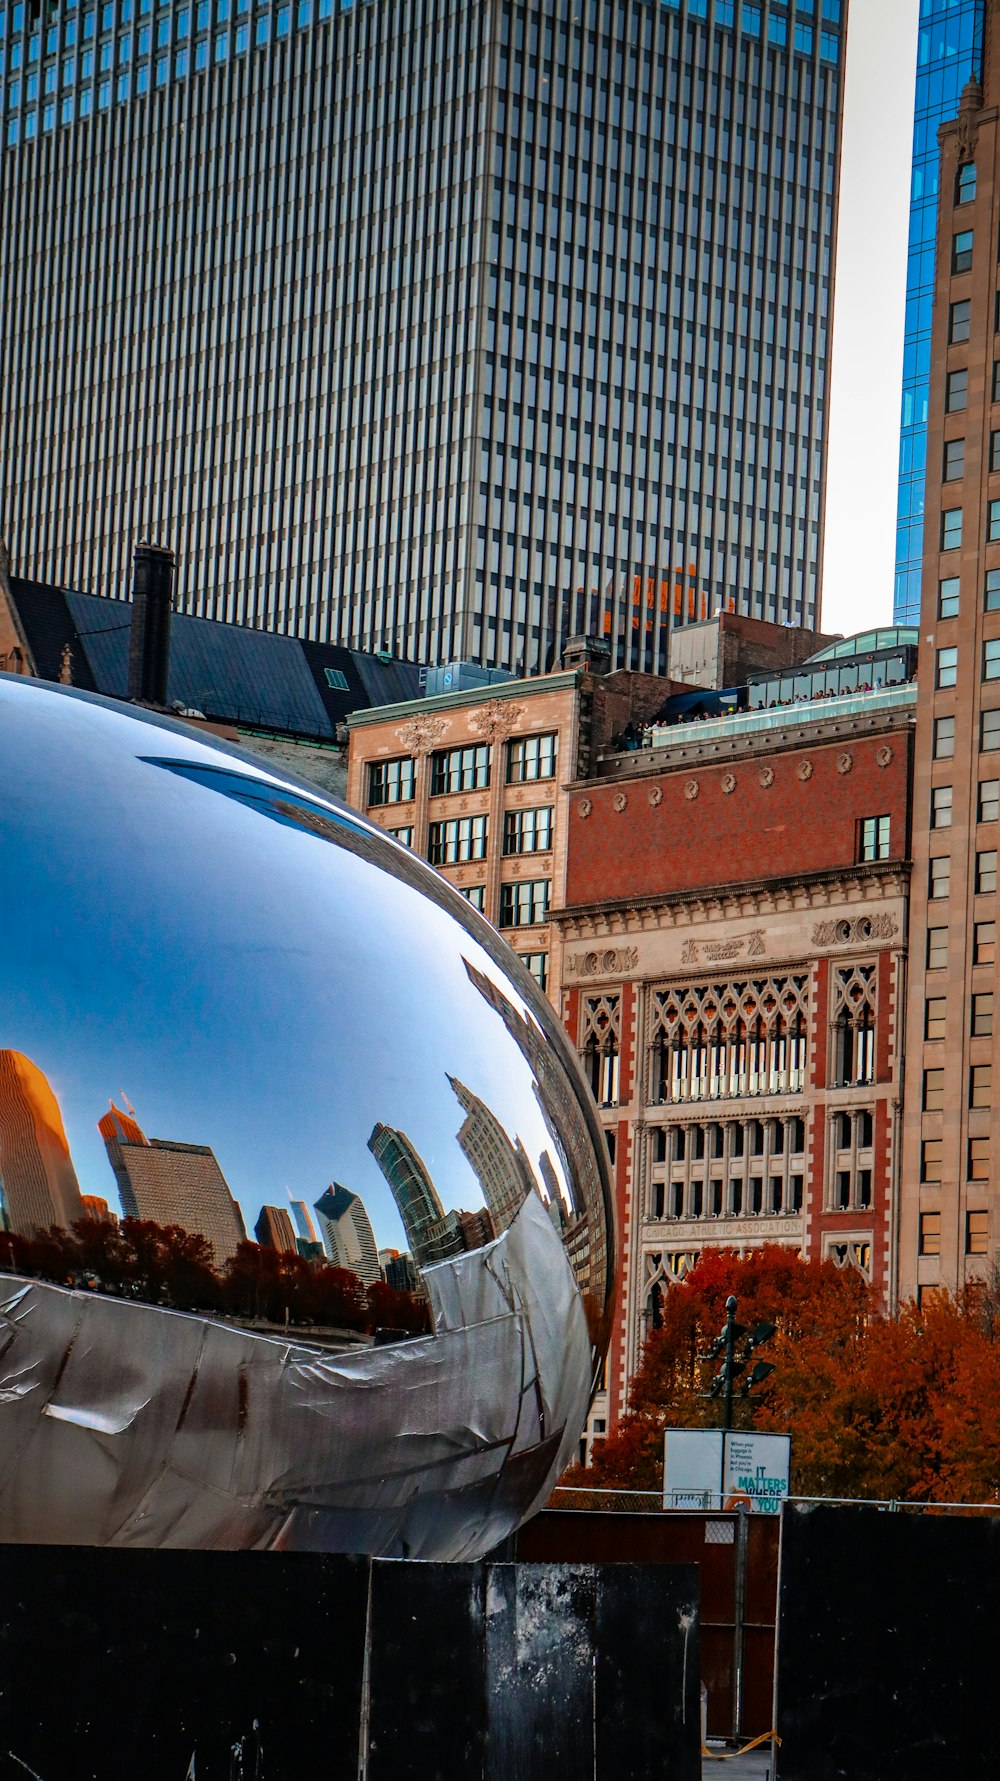 a large shiny metal object sitting in front of a tall building